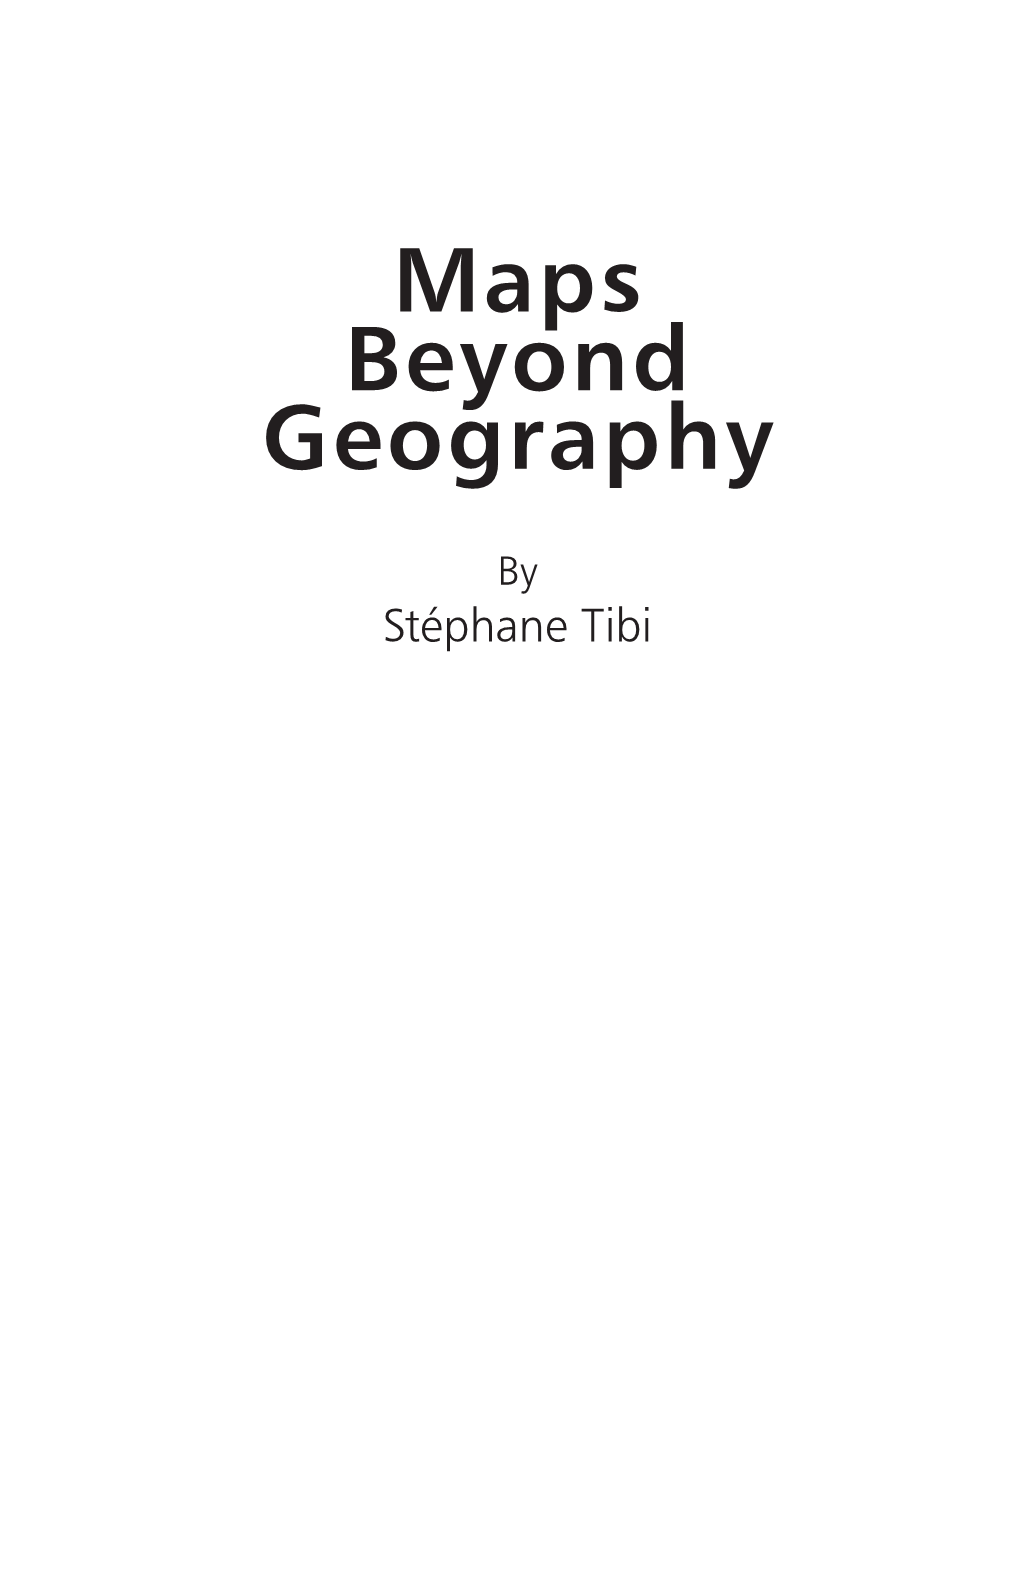 Maps Beyond Geography